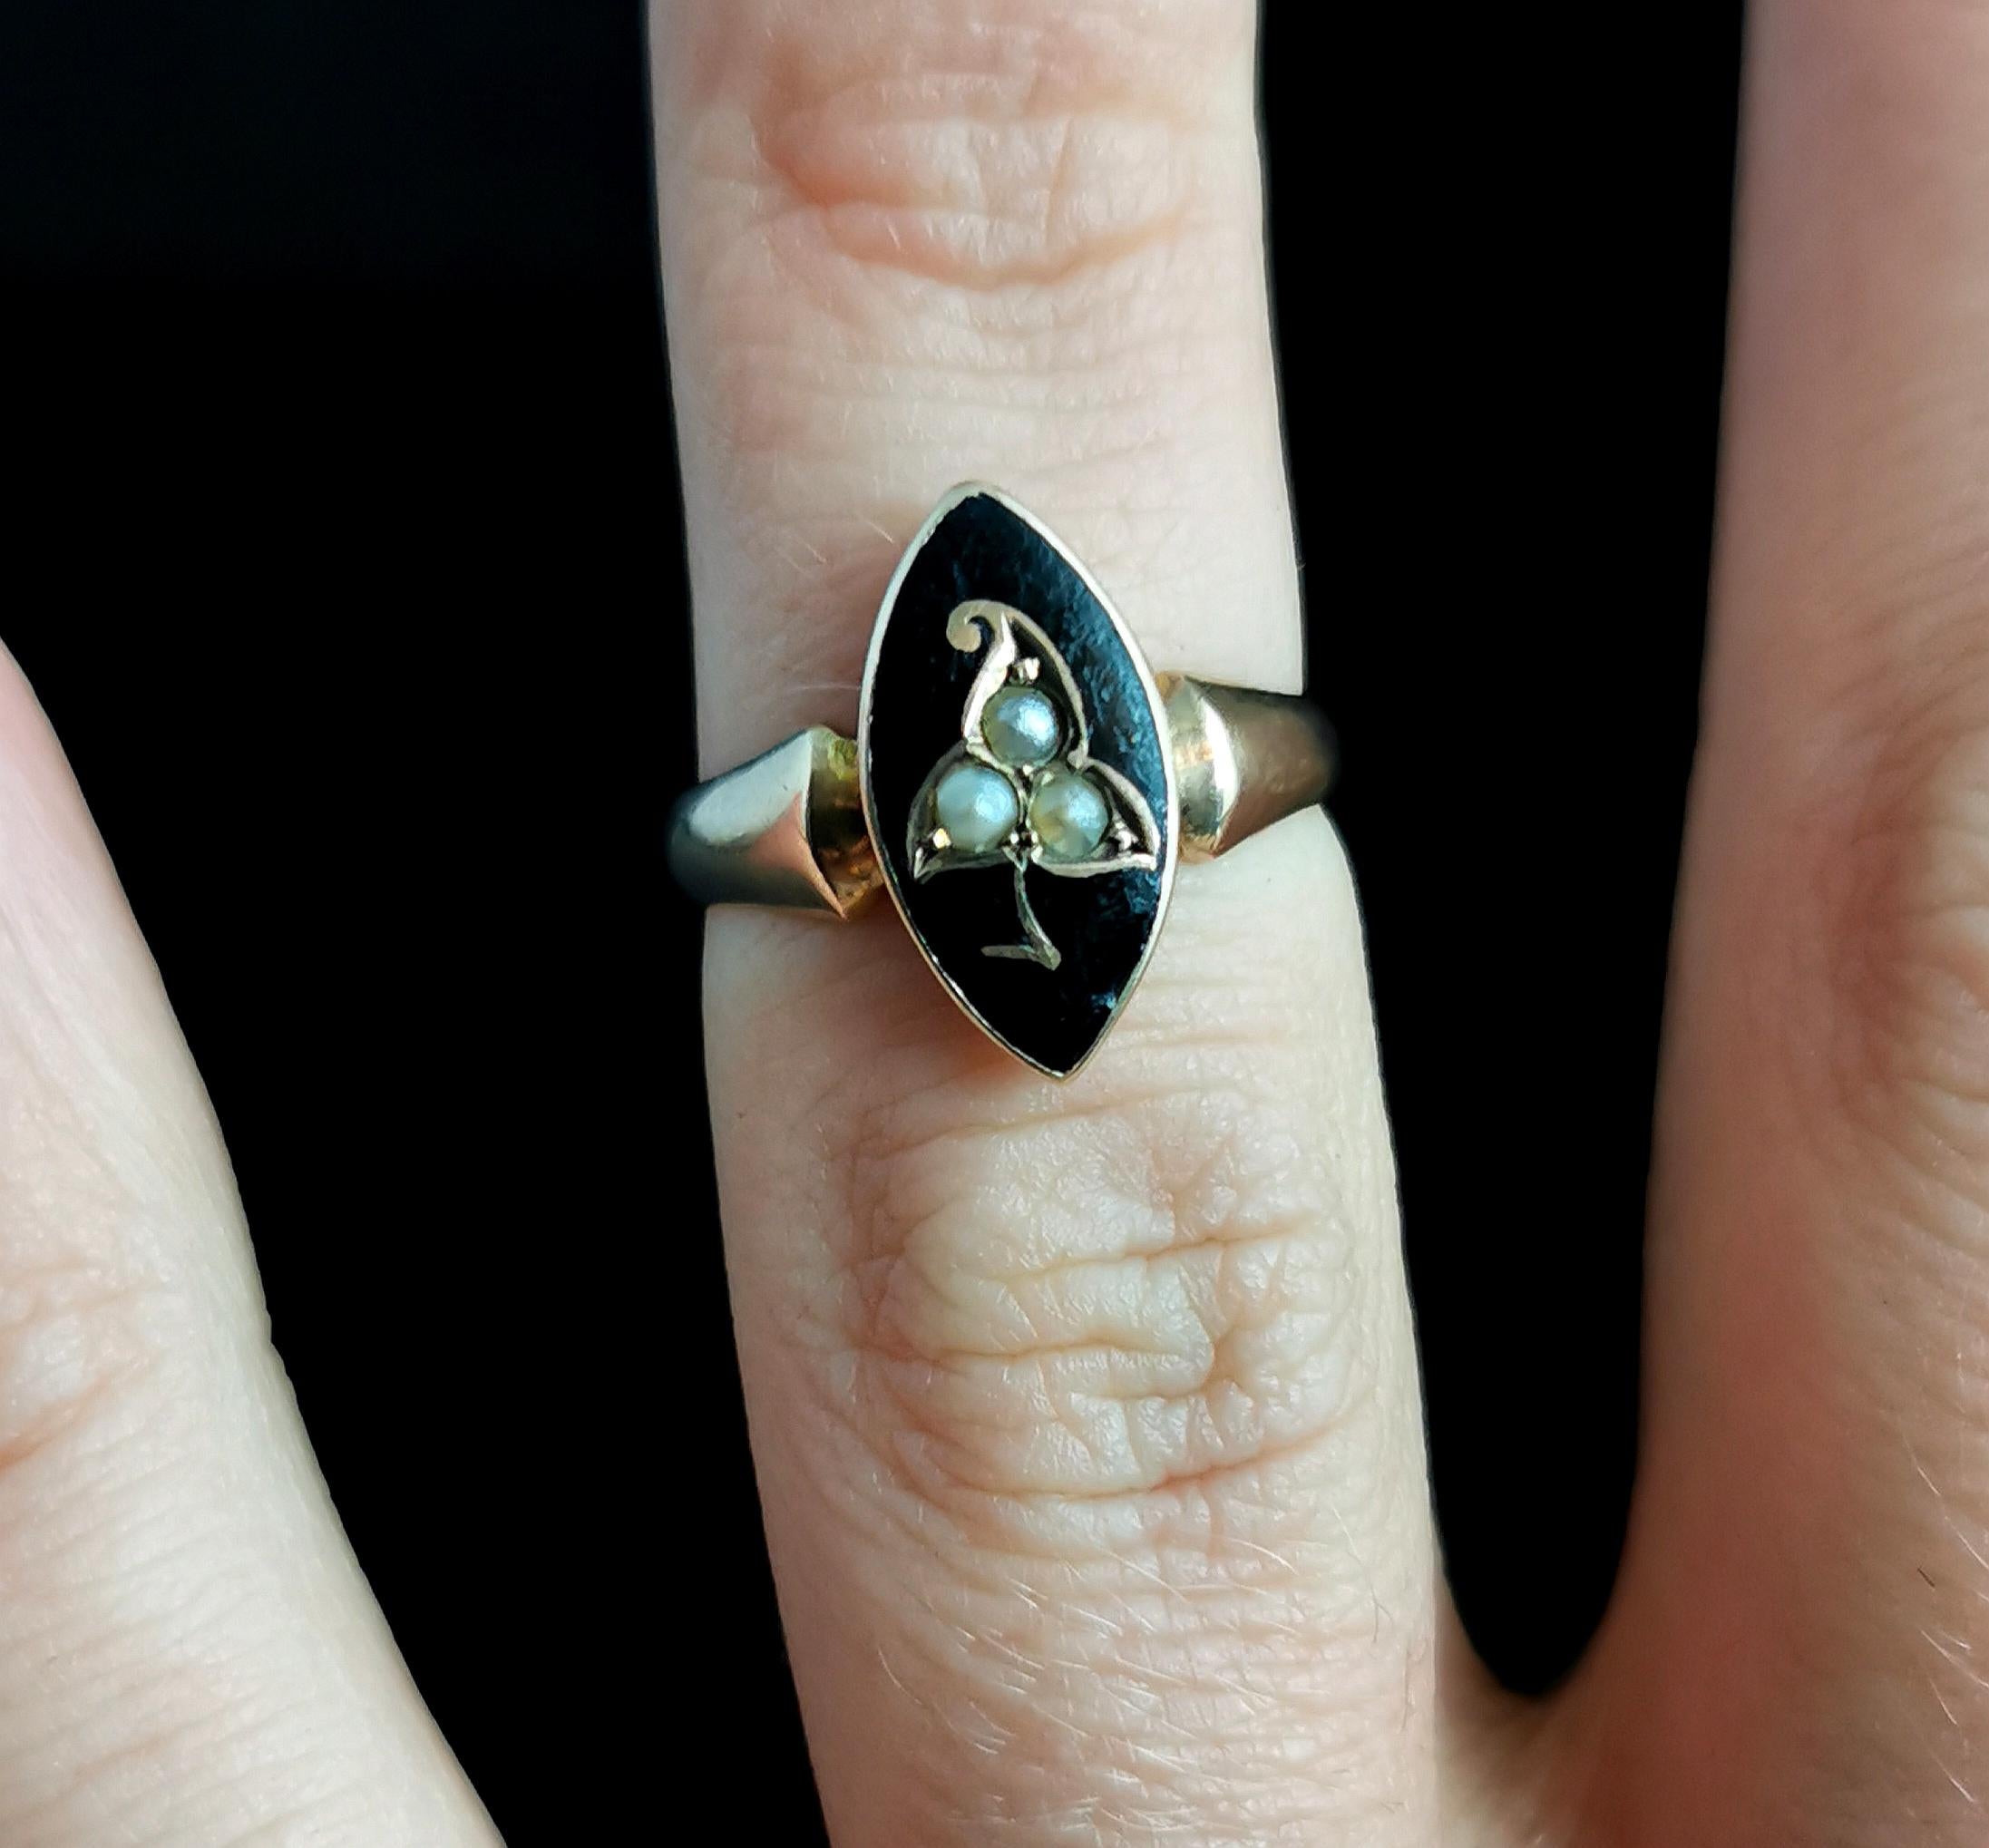 Antique Navette Mourning Ring, Black Enamel and Pearl, Ivy Leaf, 9k Yellow Gold 1